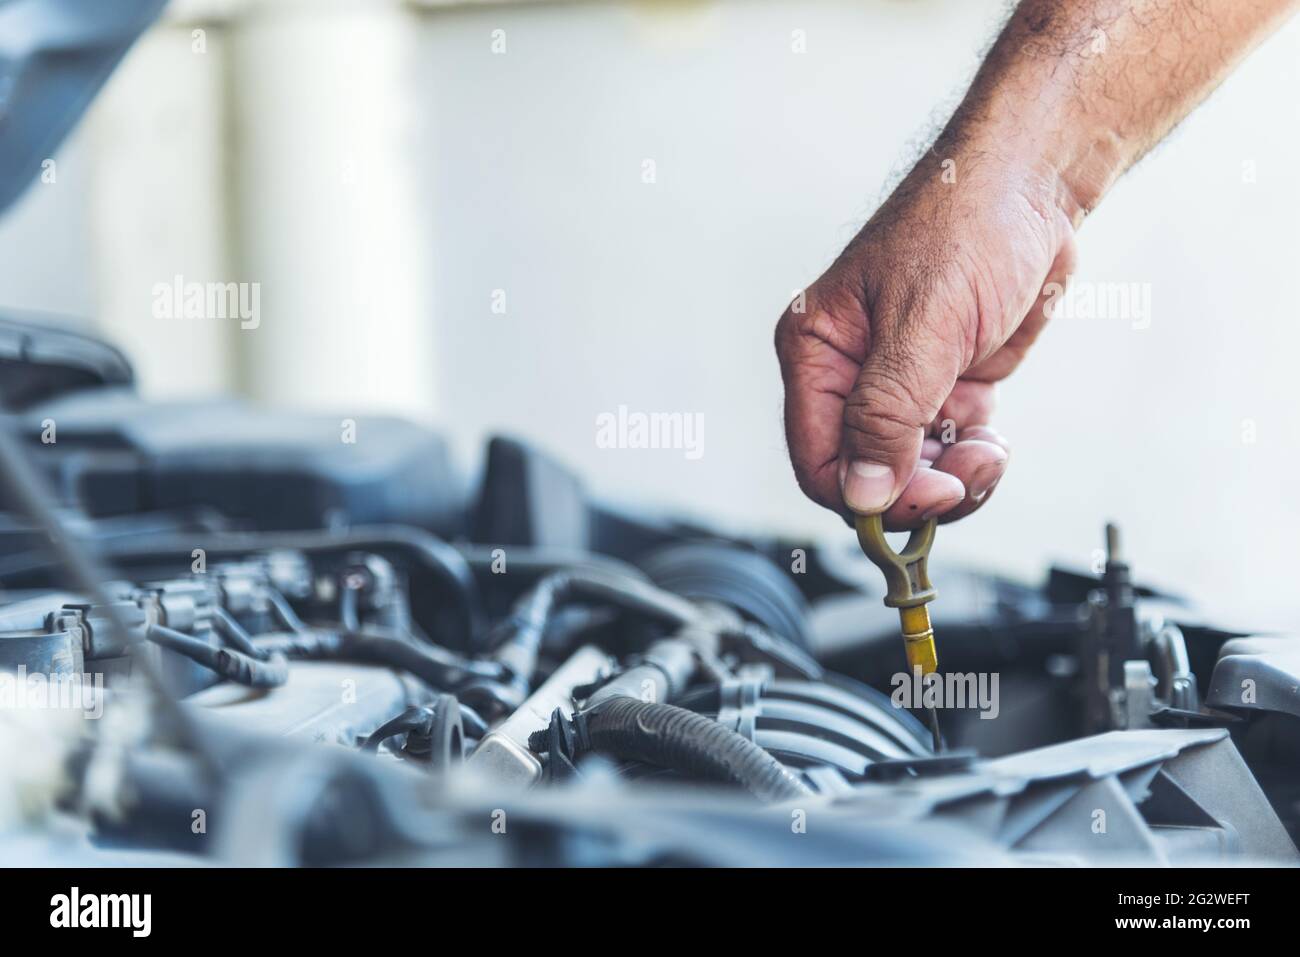 Mechanic Car Service in automobile garage auto car and vehicles service mechanical engineering. Automobile mechanic hands car repairs automotive techn Stock Photo